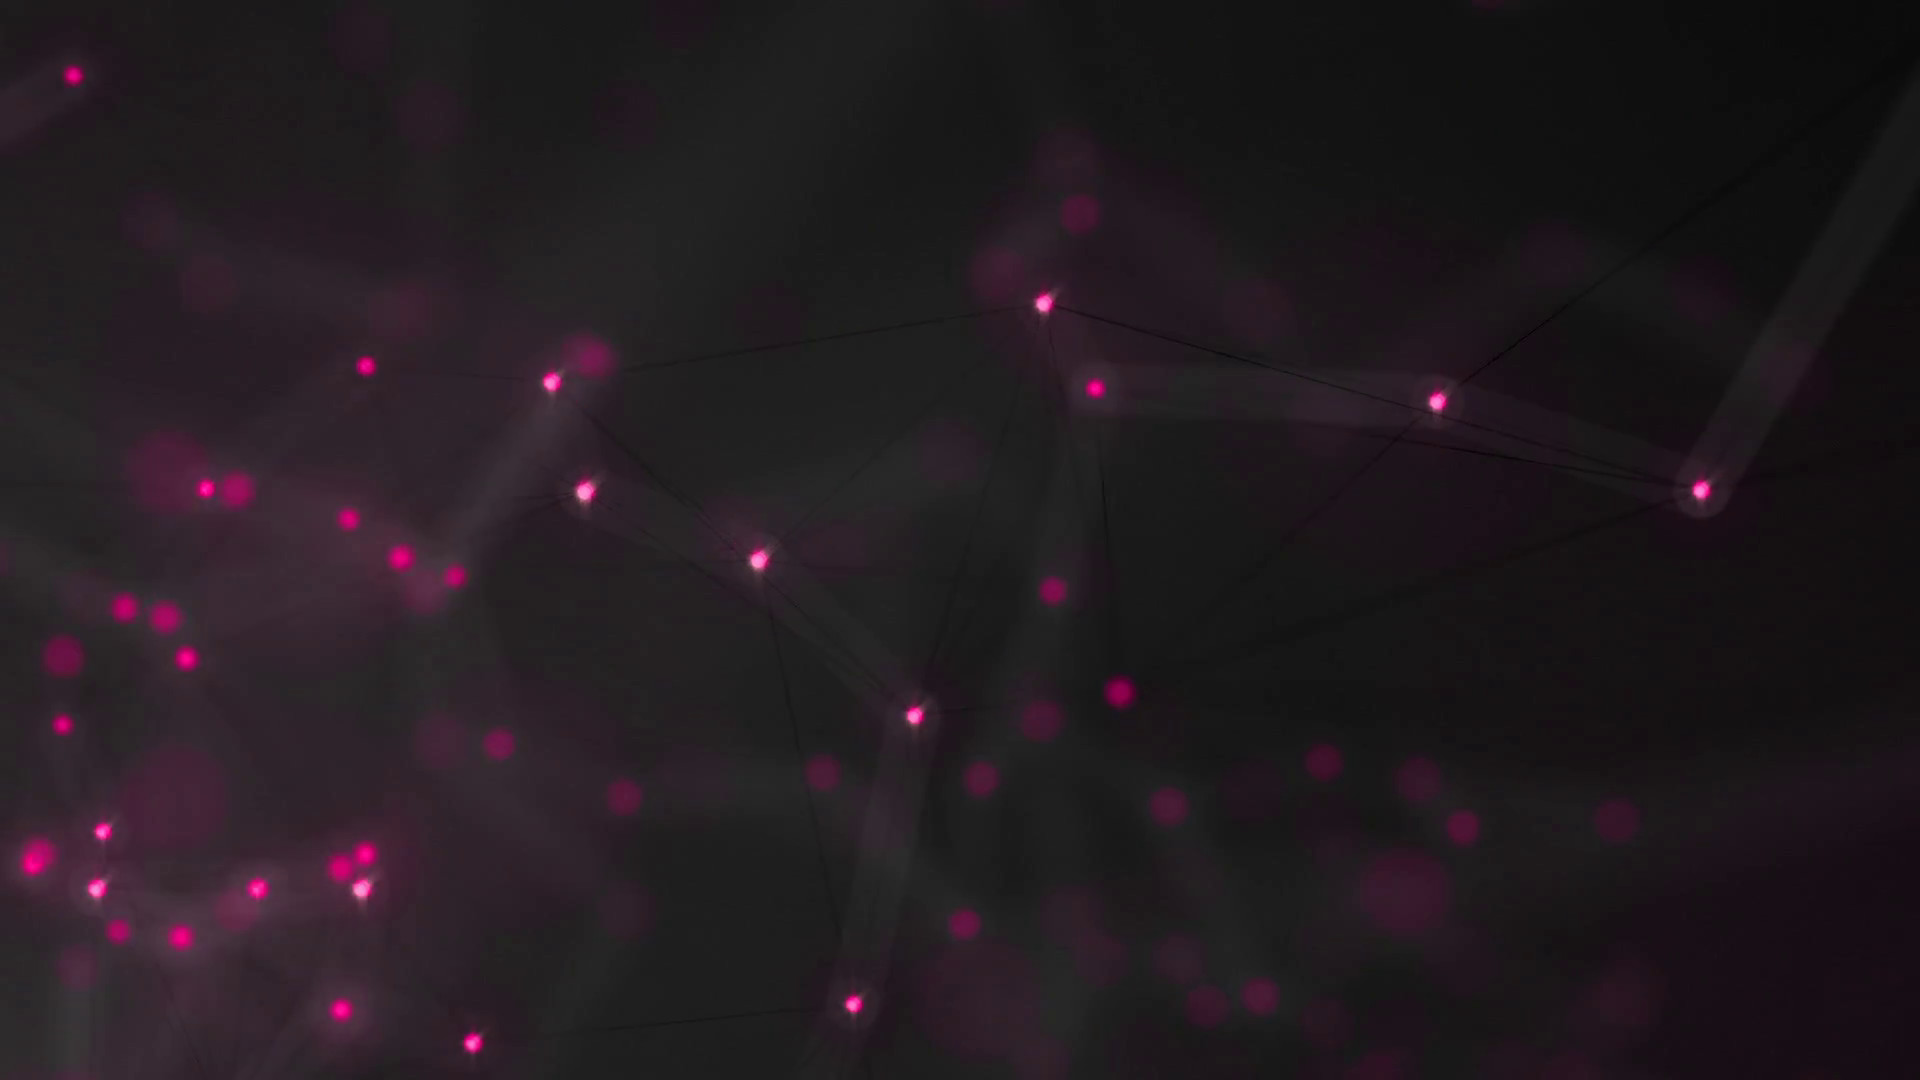 1920x1080 Network Connection Cloud Loop 7A: dark background, slow moving shifting  black mesh cloud with